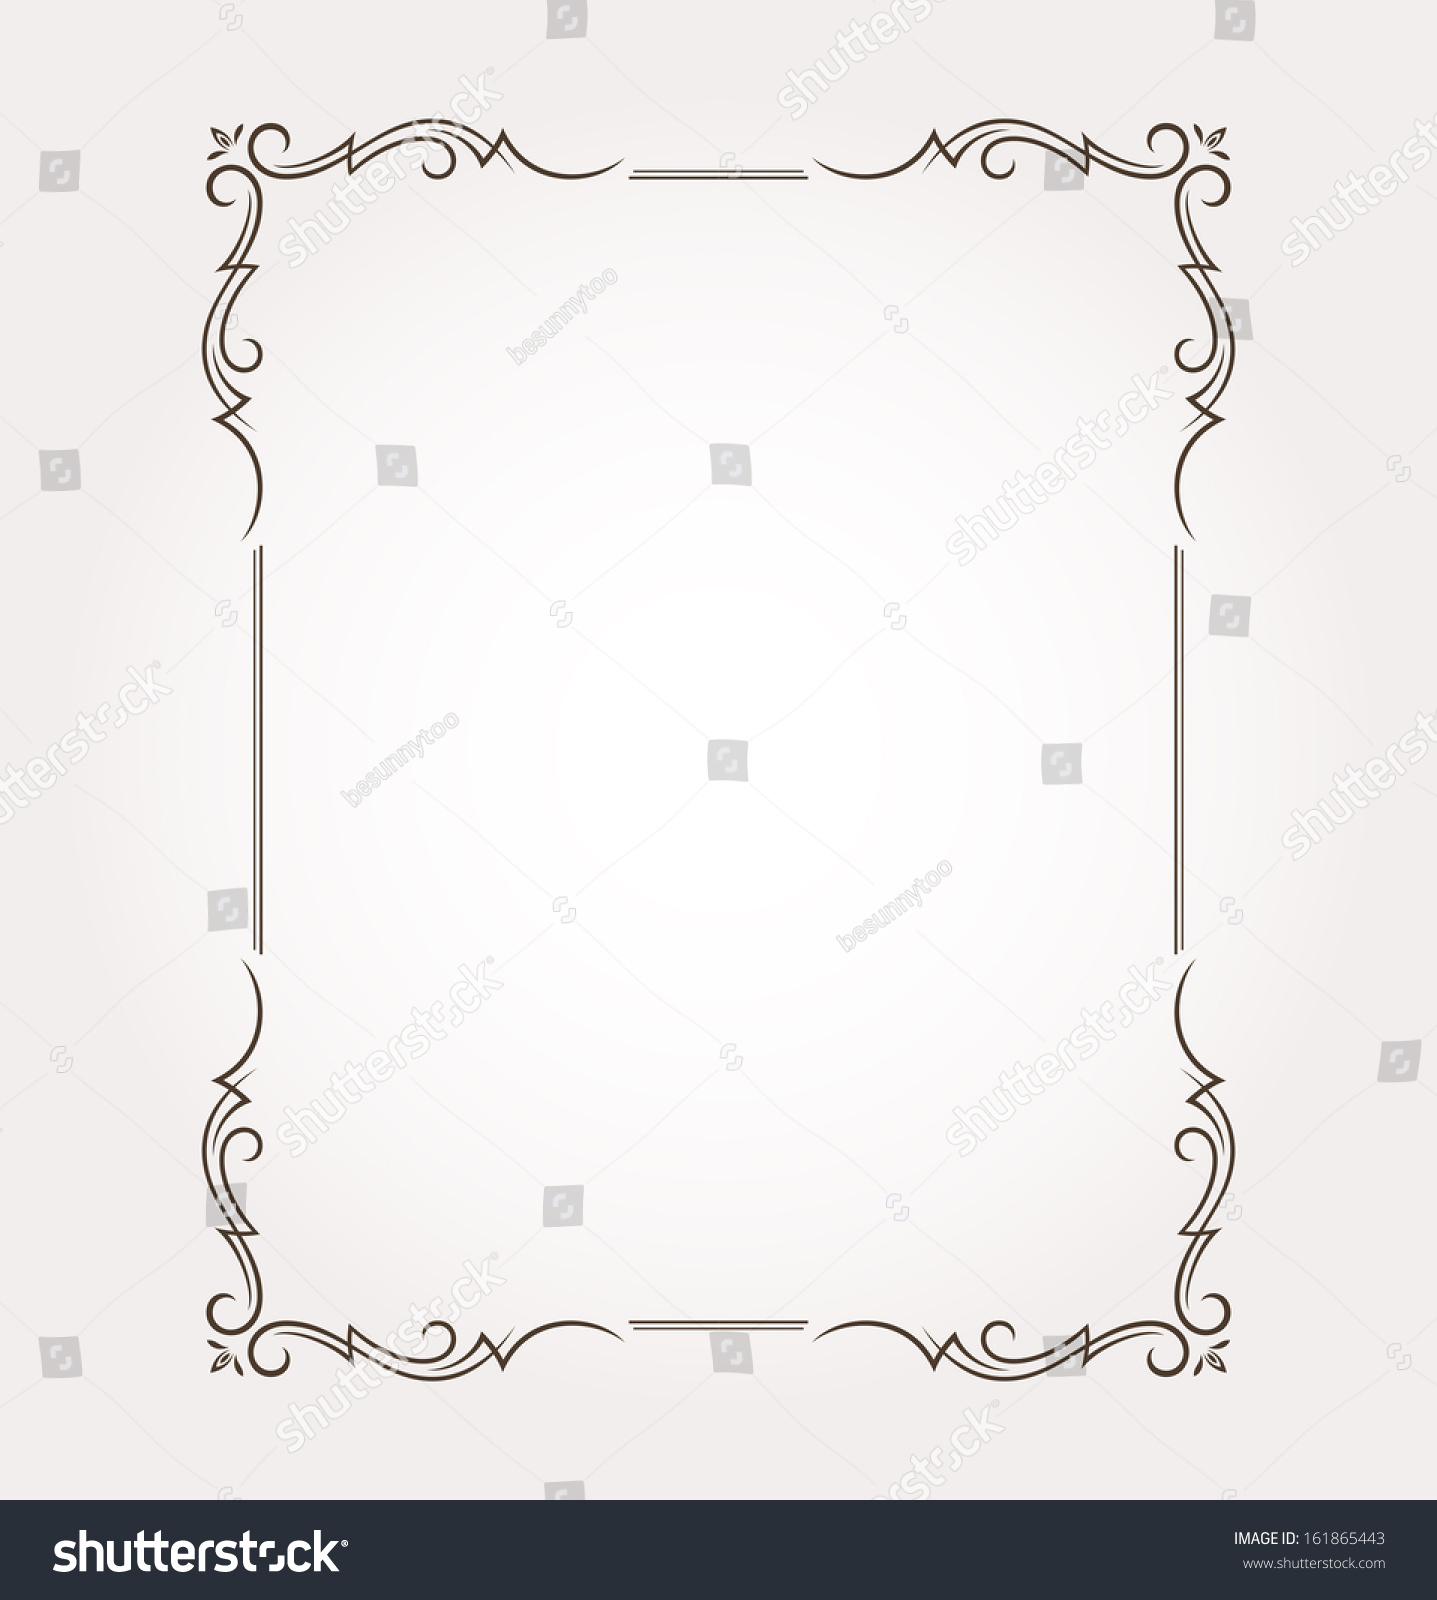 Calligraphic Frame And Page Decoration. Vector Illustration - 161865443 ...